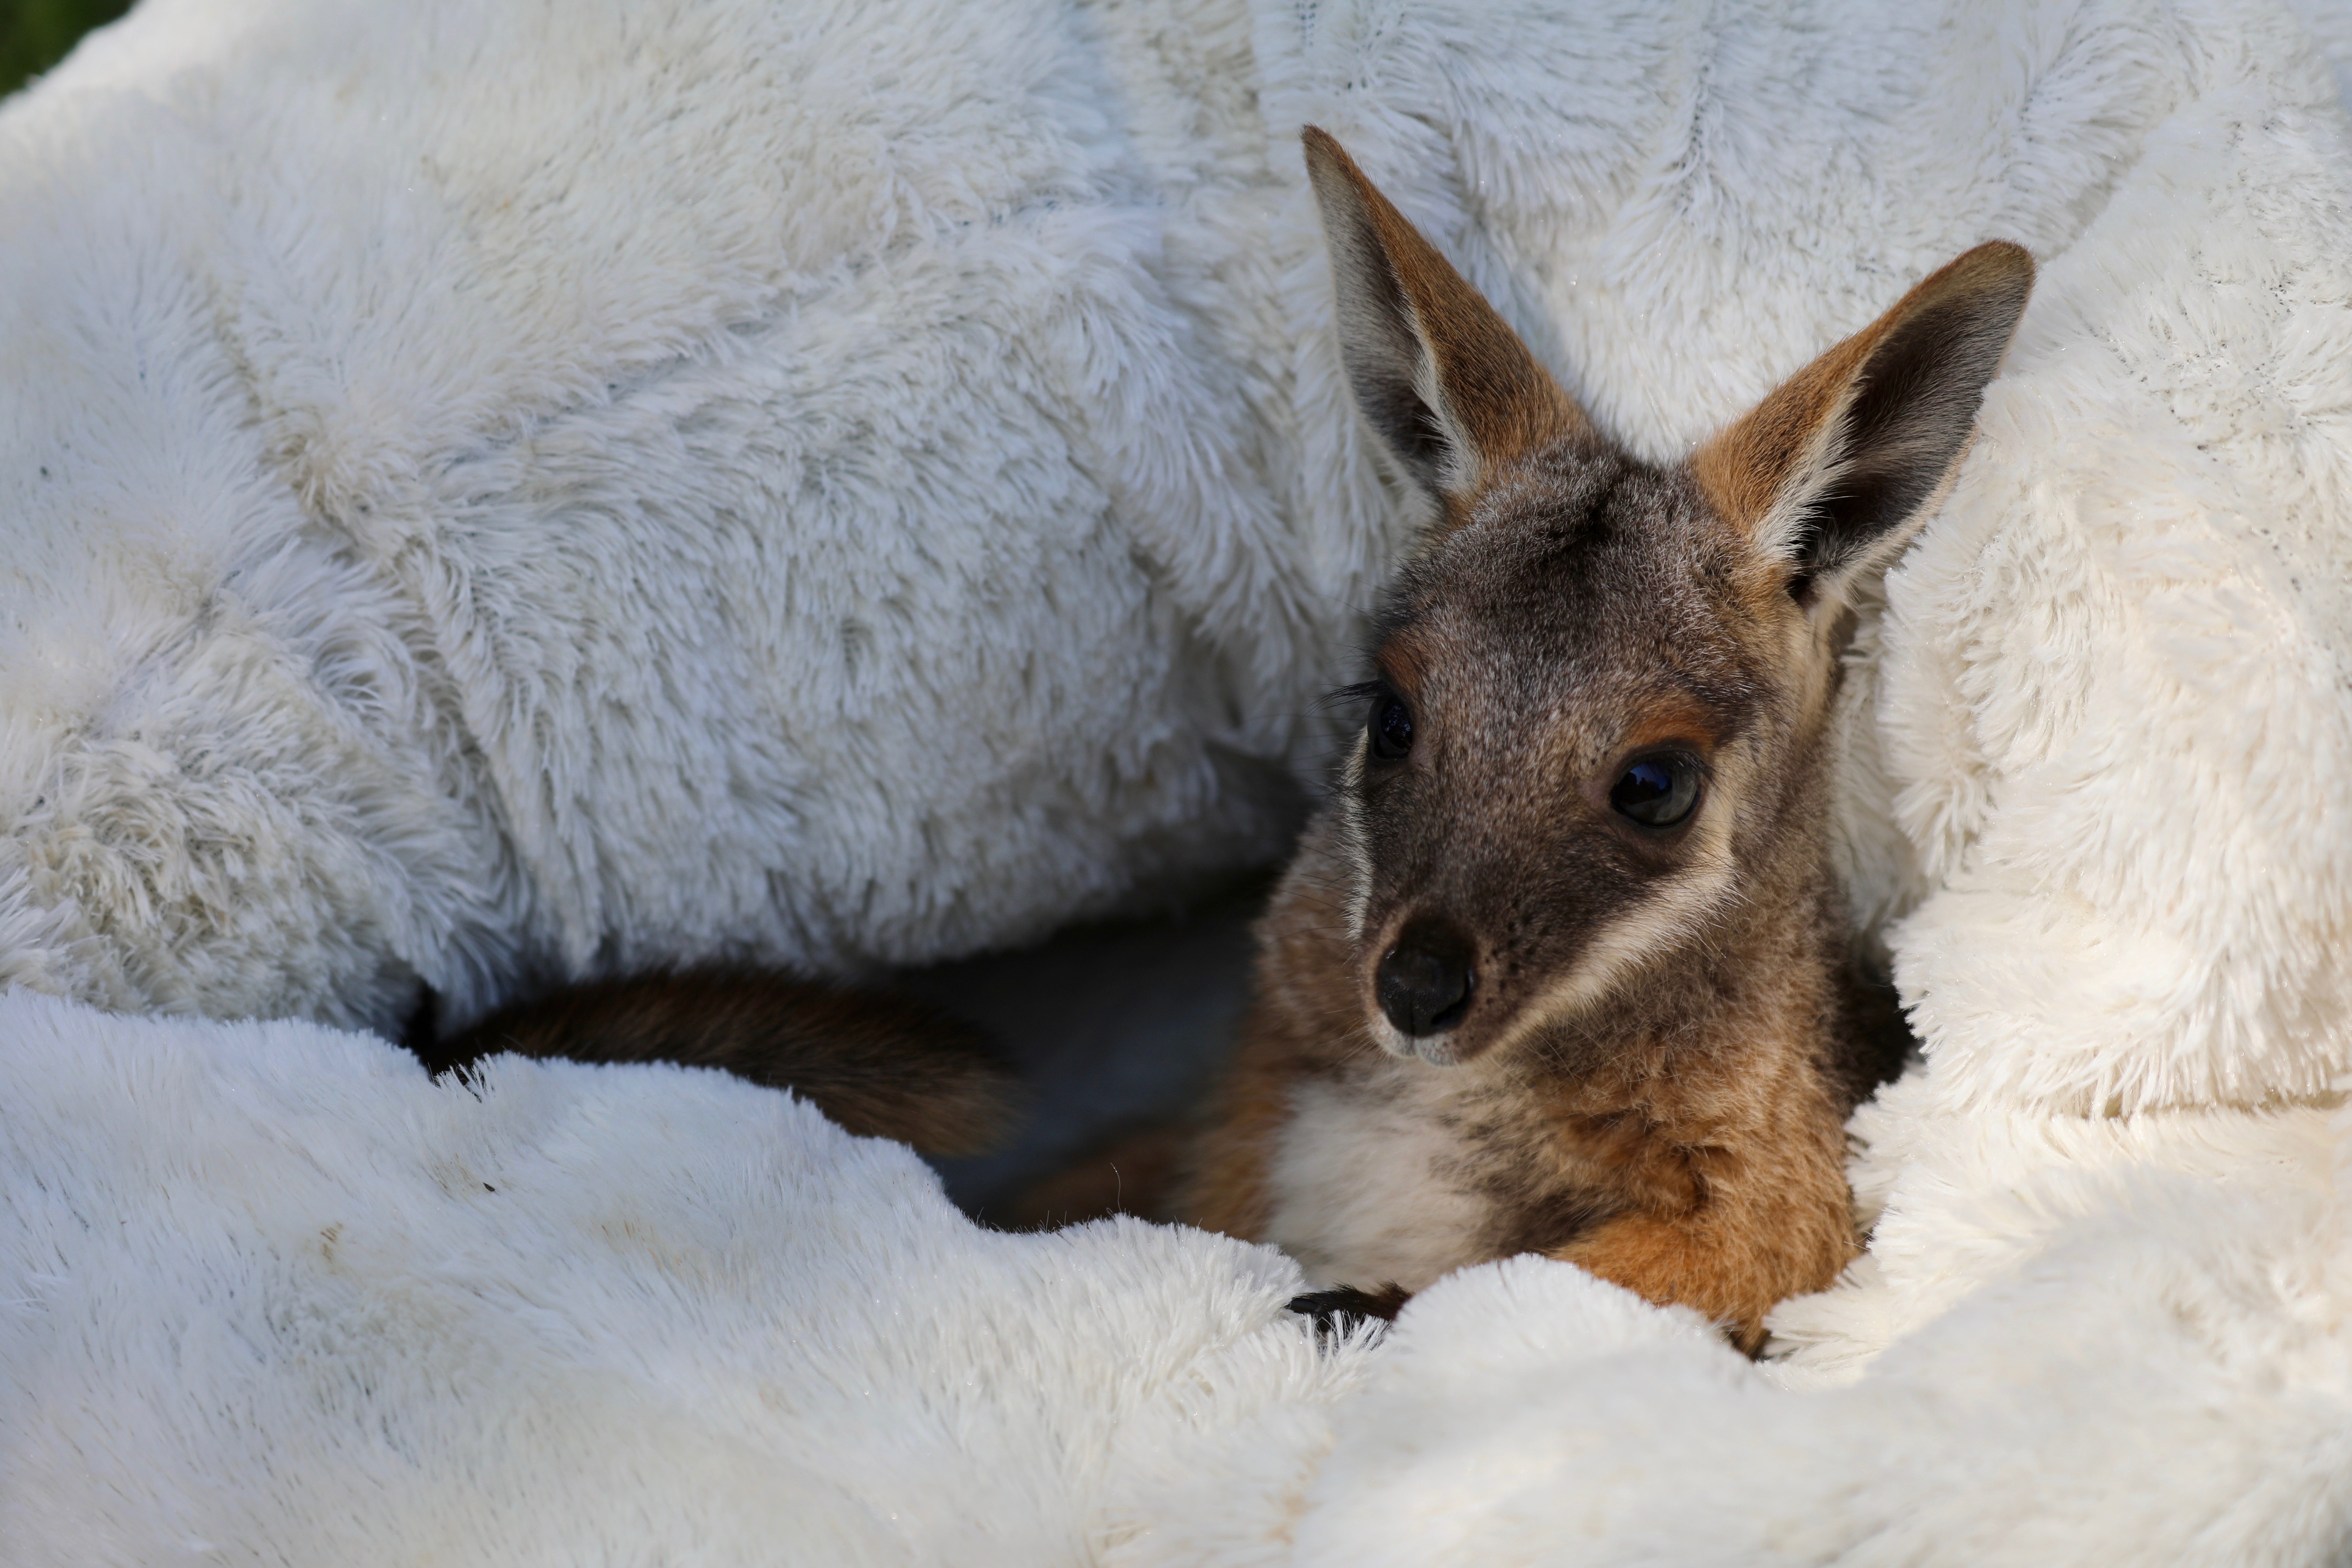 Baby joey, Dorito, has taken her first hops just in time for Australia Day.